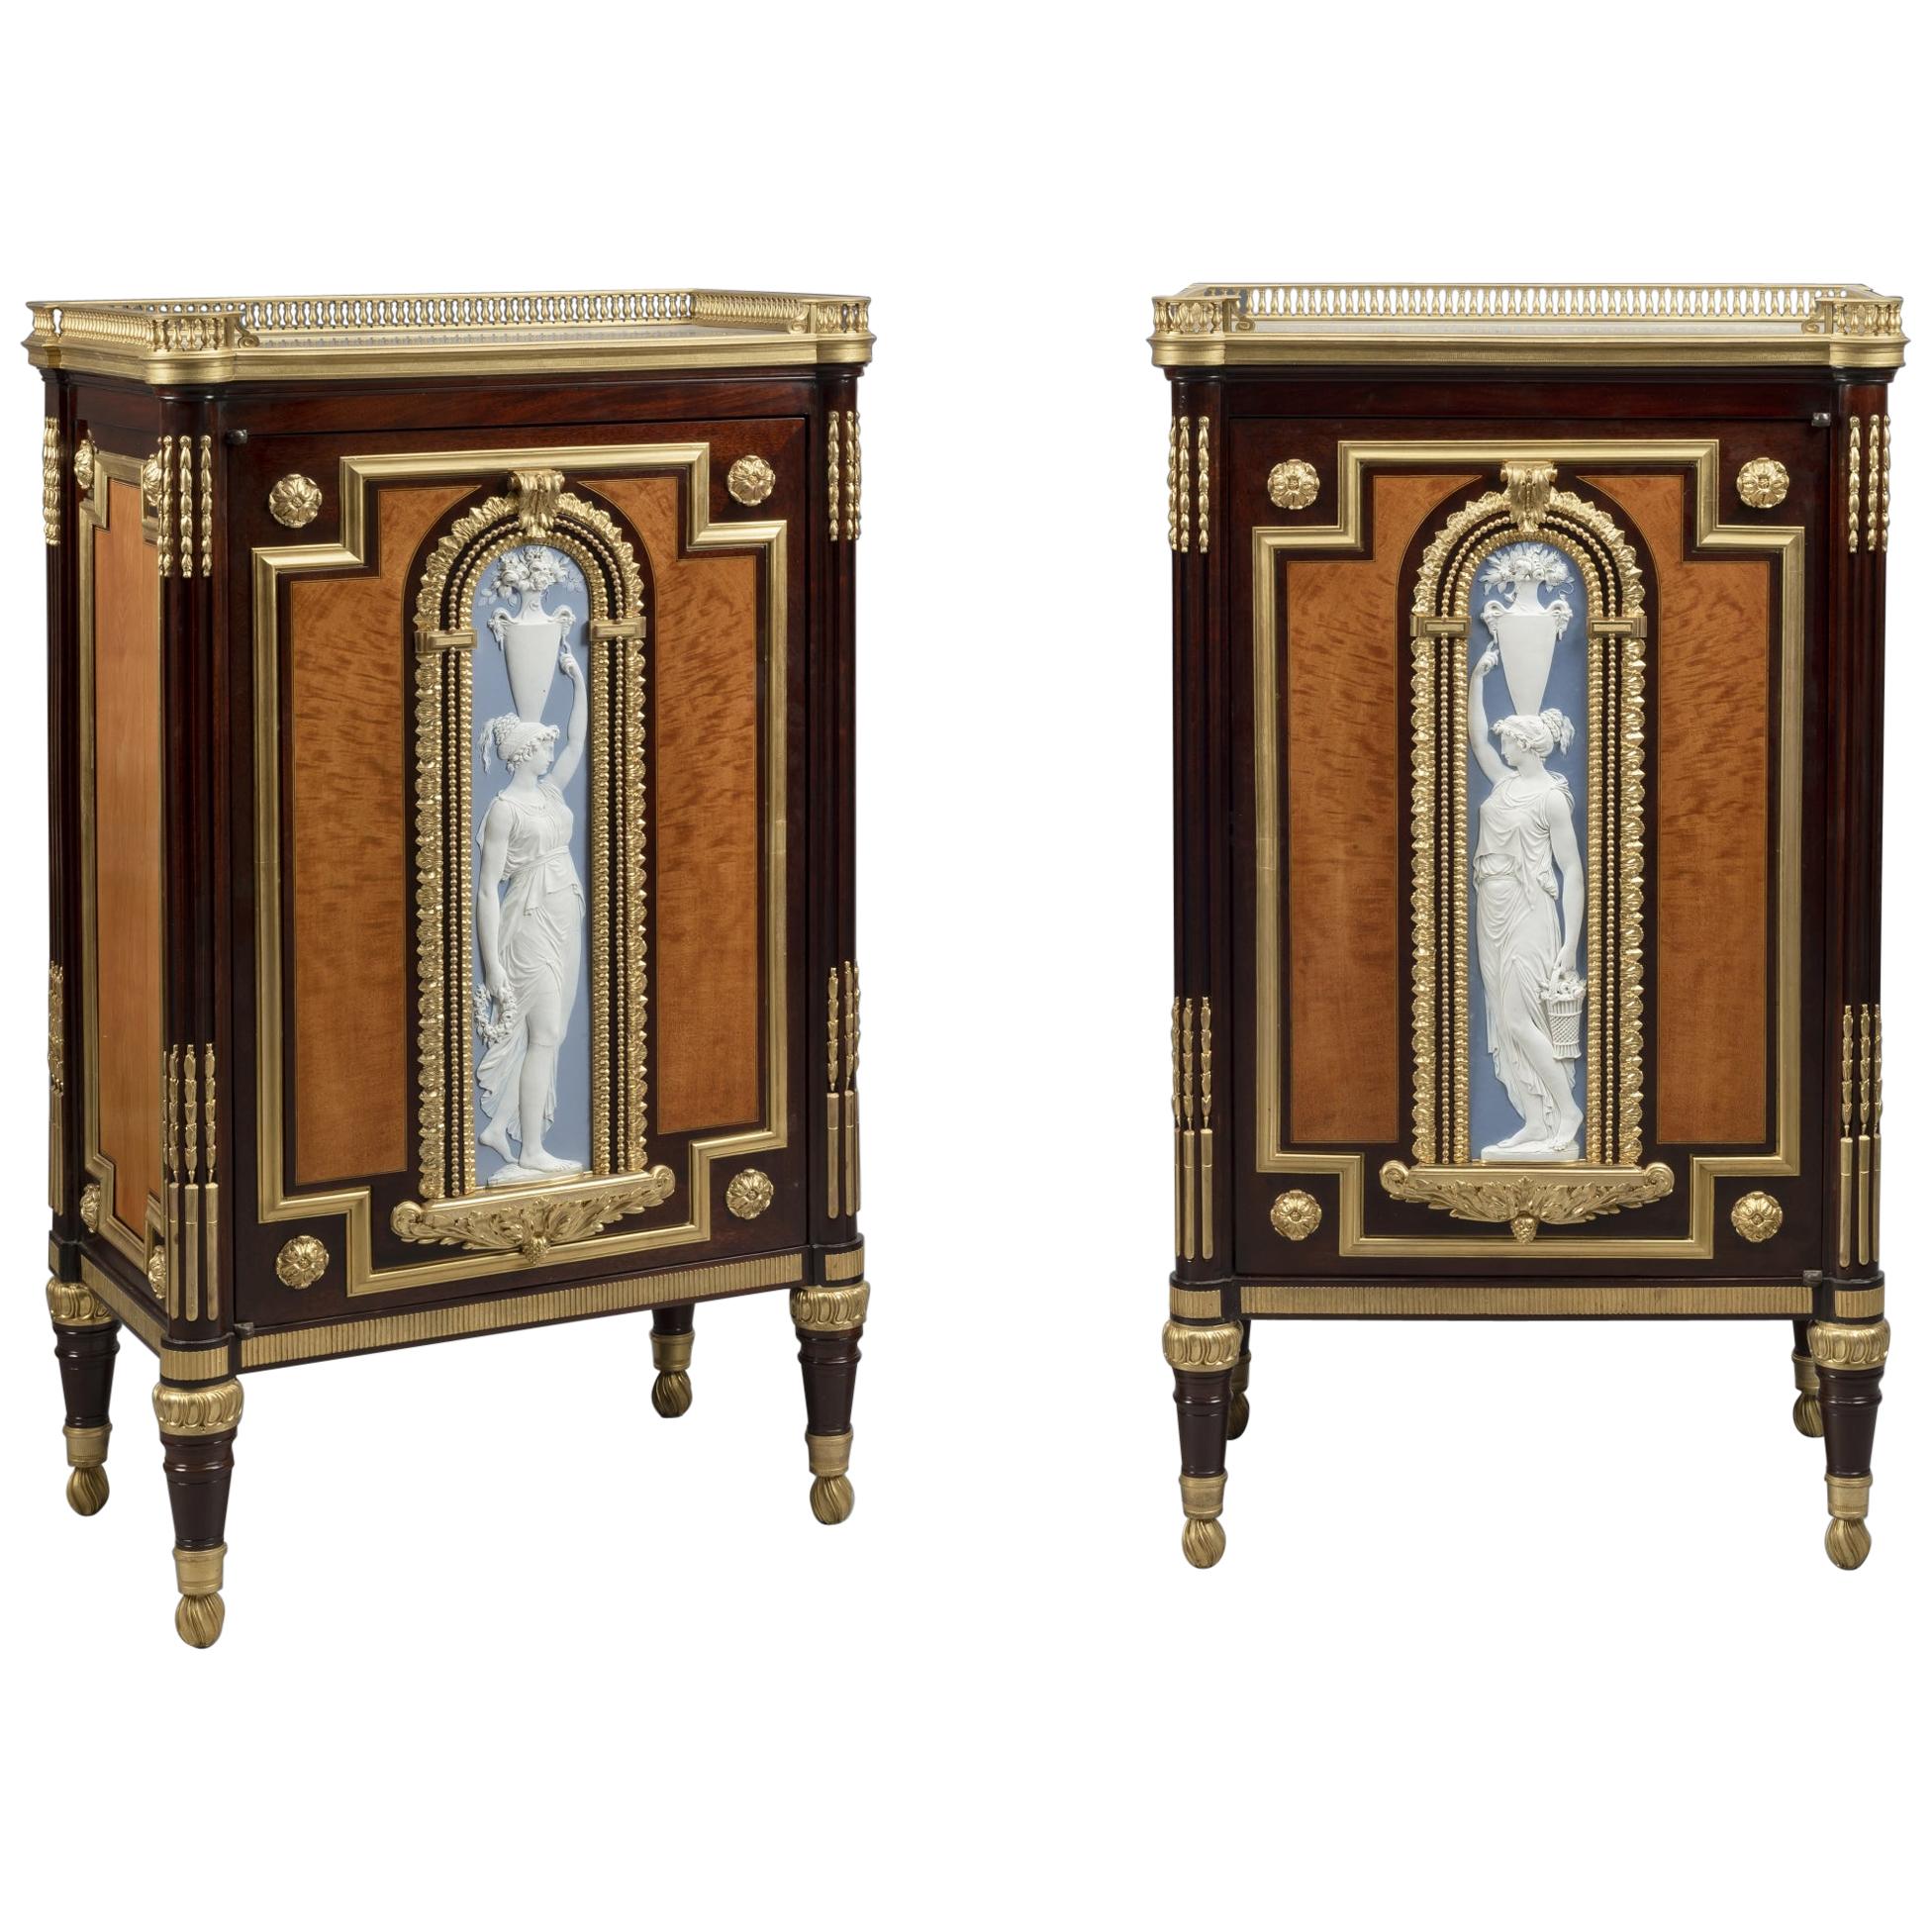 Highly Important Pair of Neoclassical Side Cabinets by Jules Piret, circa 1860